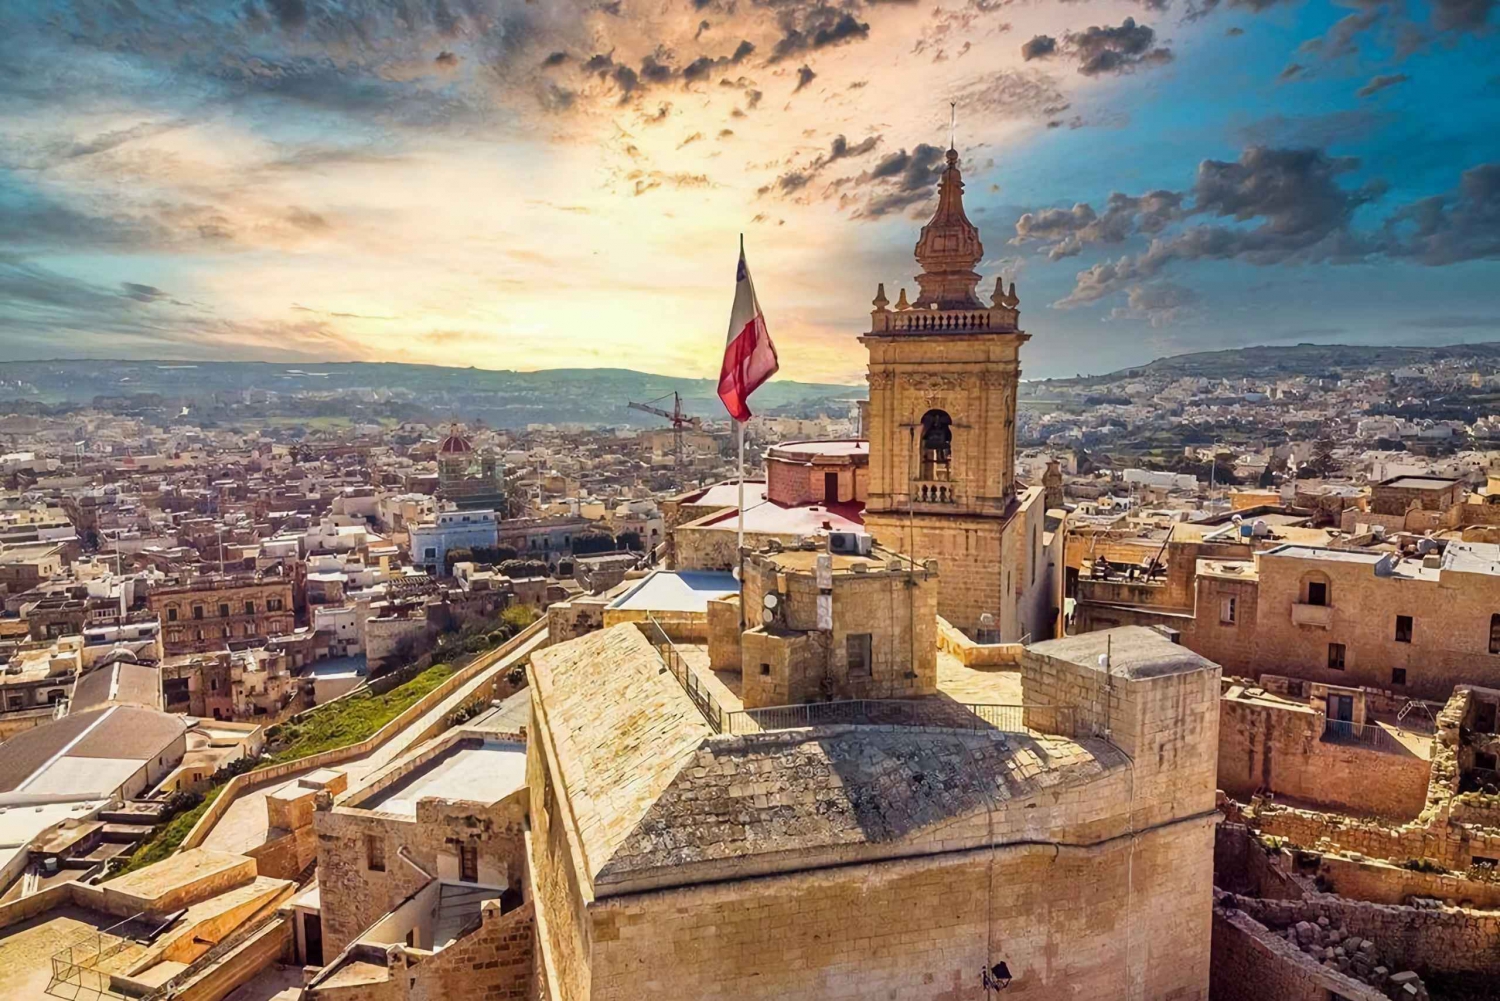 Malta: Discover Malta & Gozo 5 Tours Package With Transfers